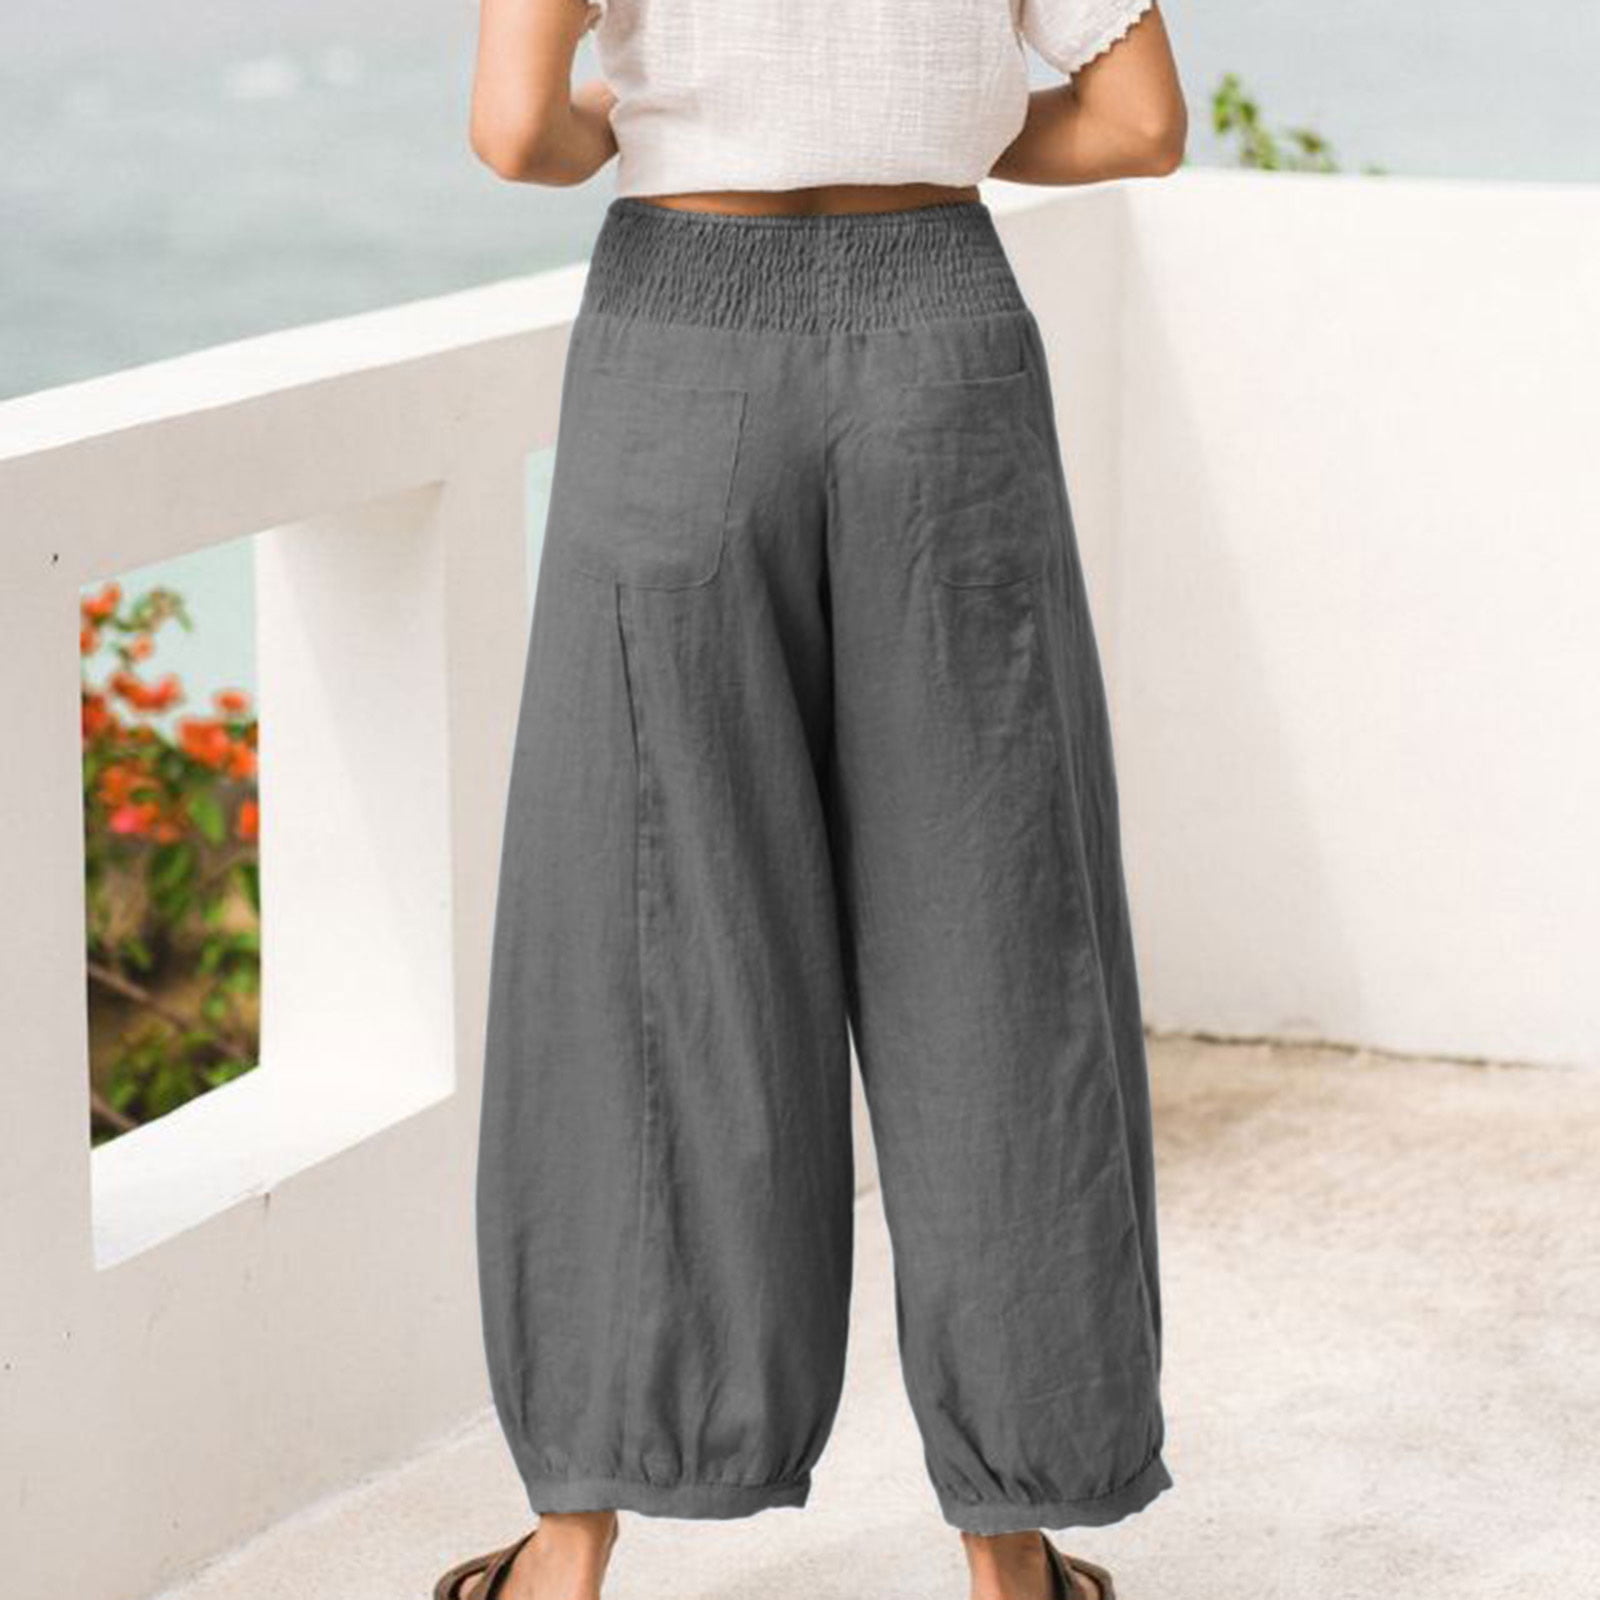 JEGULV Linen Pants for Women Casual Summer High Waist Wide Leg Palazzo Lounge  Pants Solid Baggy Pant Trousers with Pocket D01#khaki Small